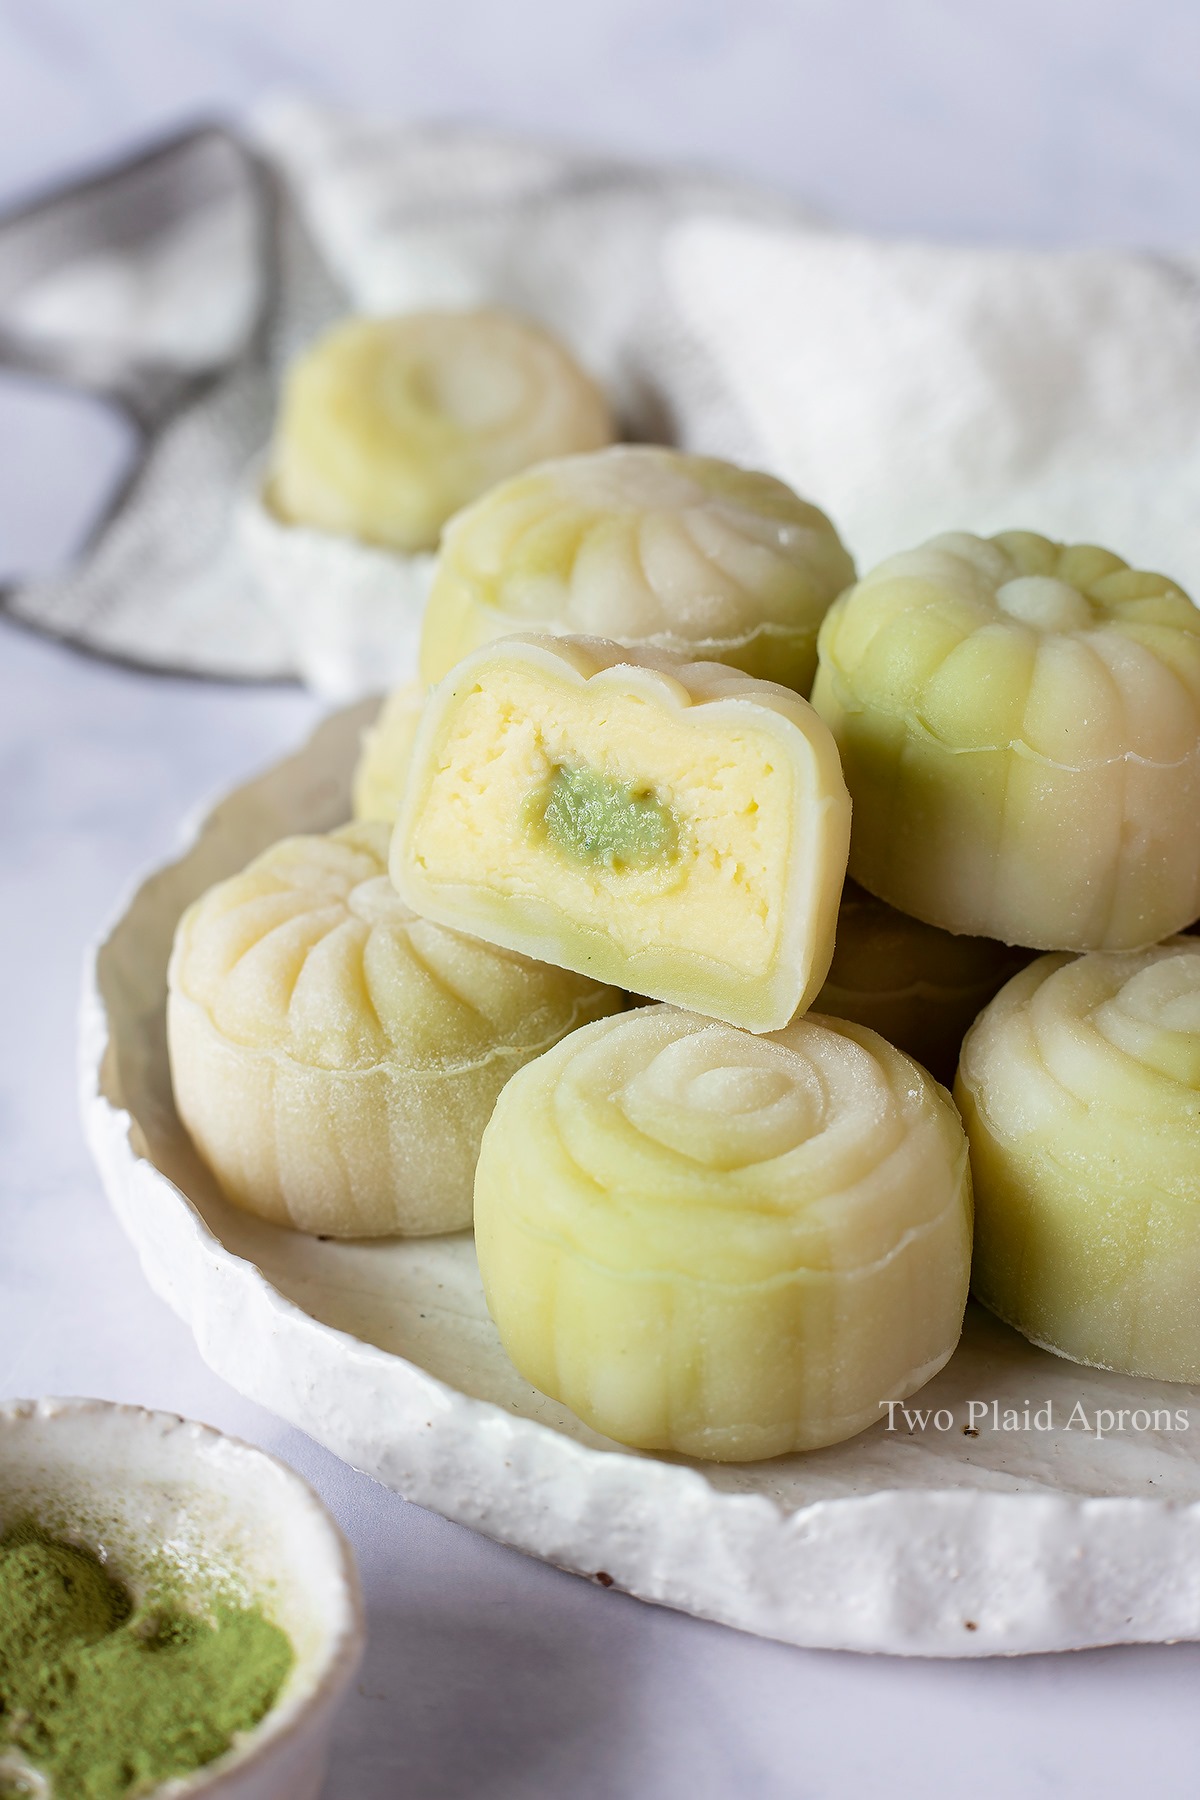 Front view of snow skin mooncakes with custard filling on a plate showing interior custard.